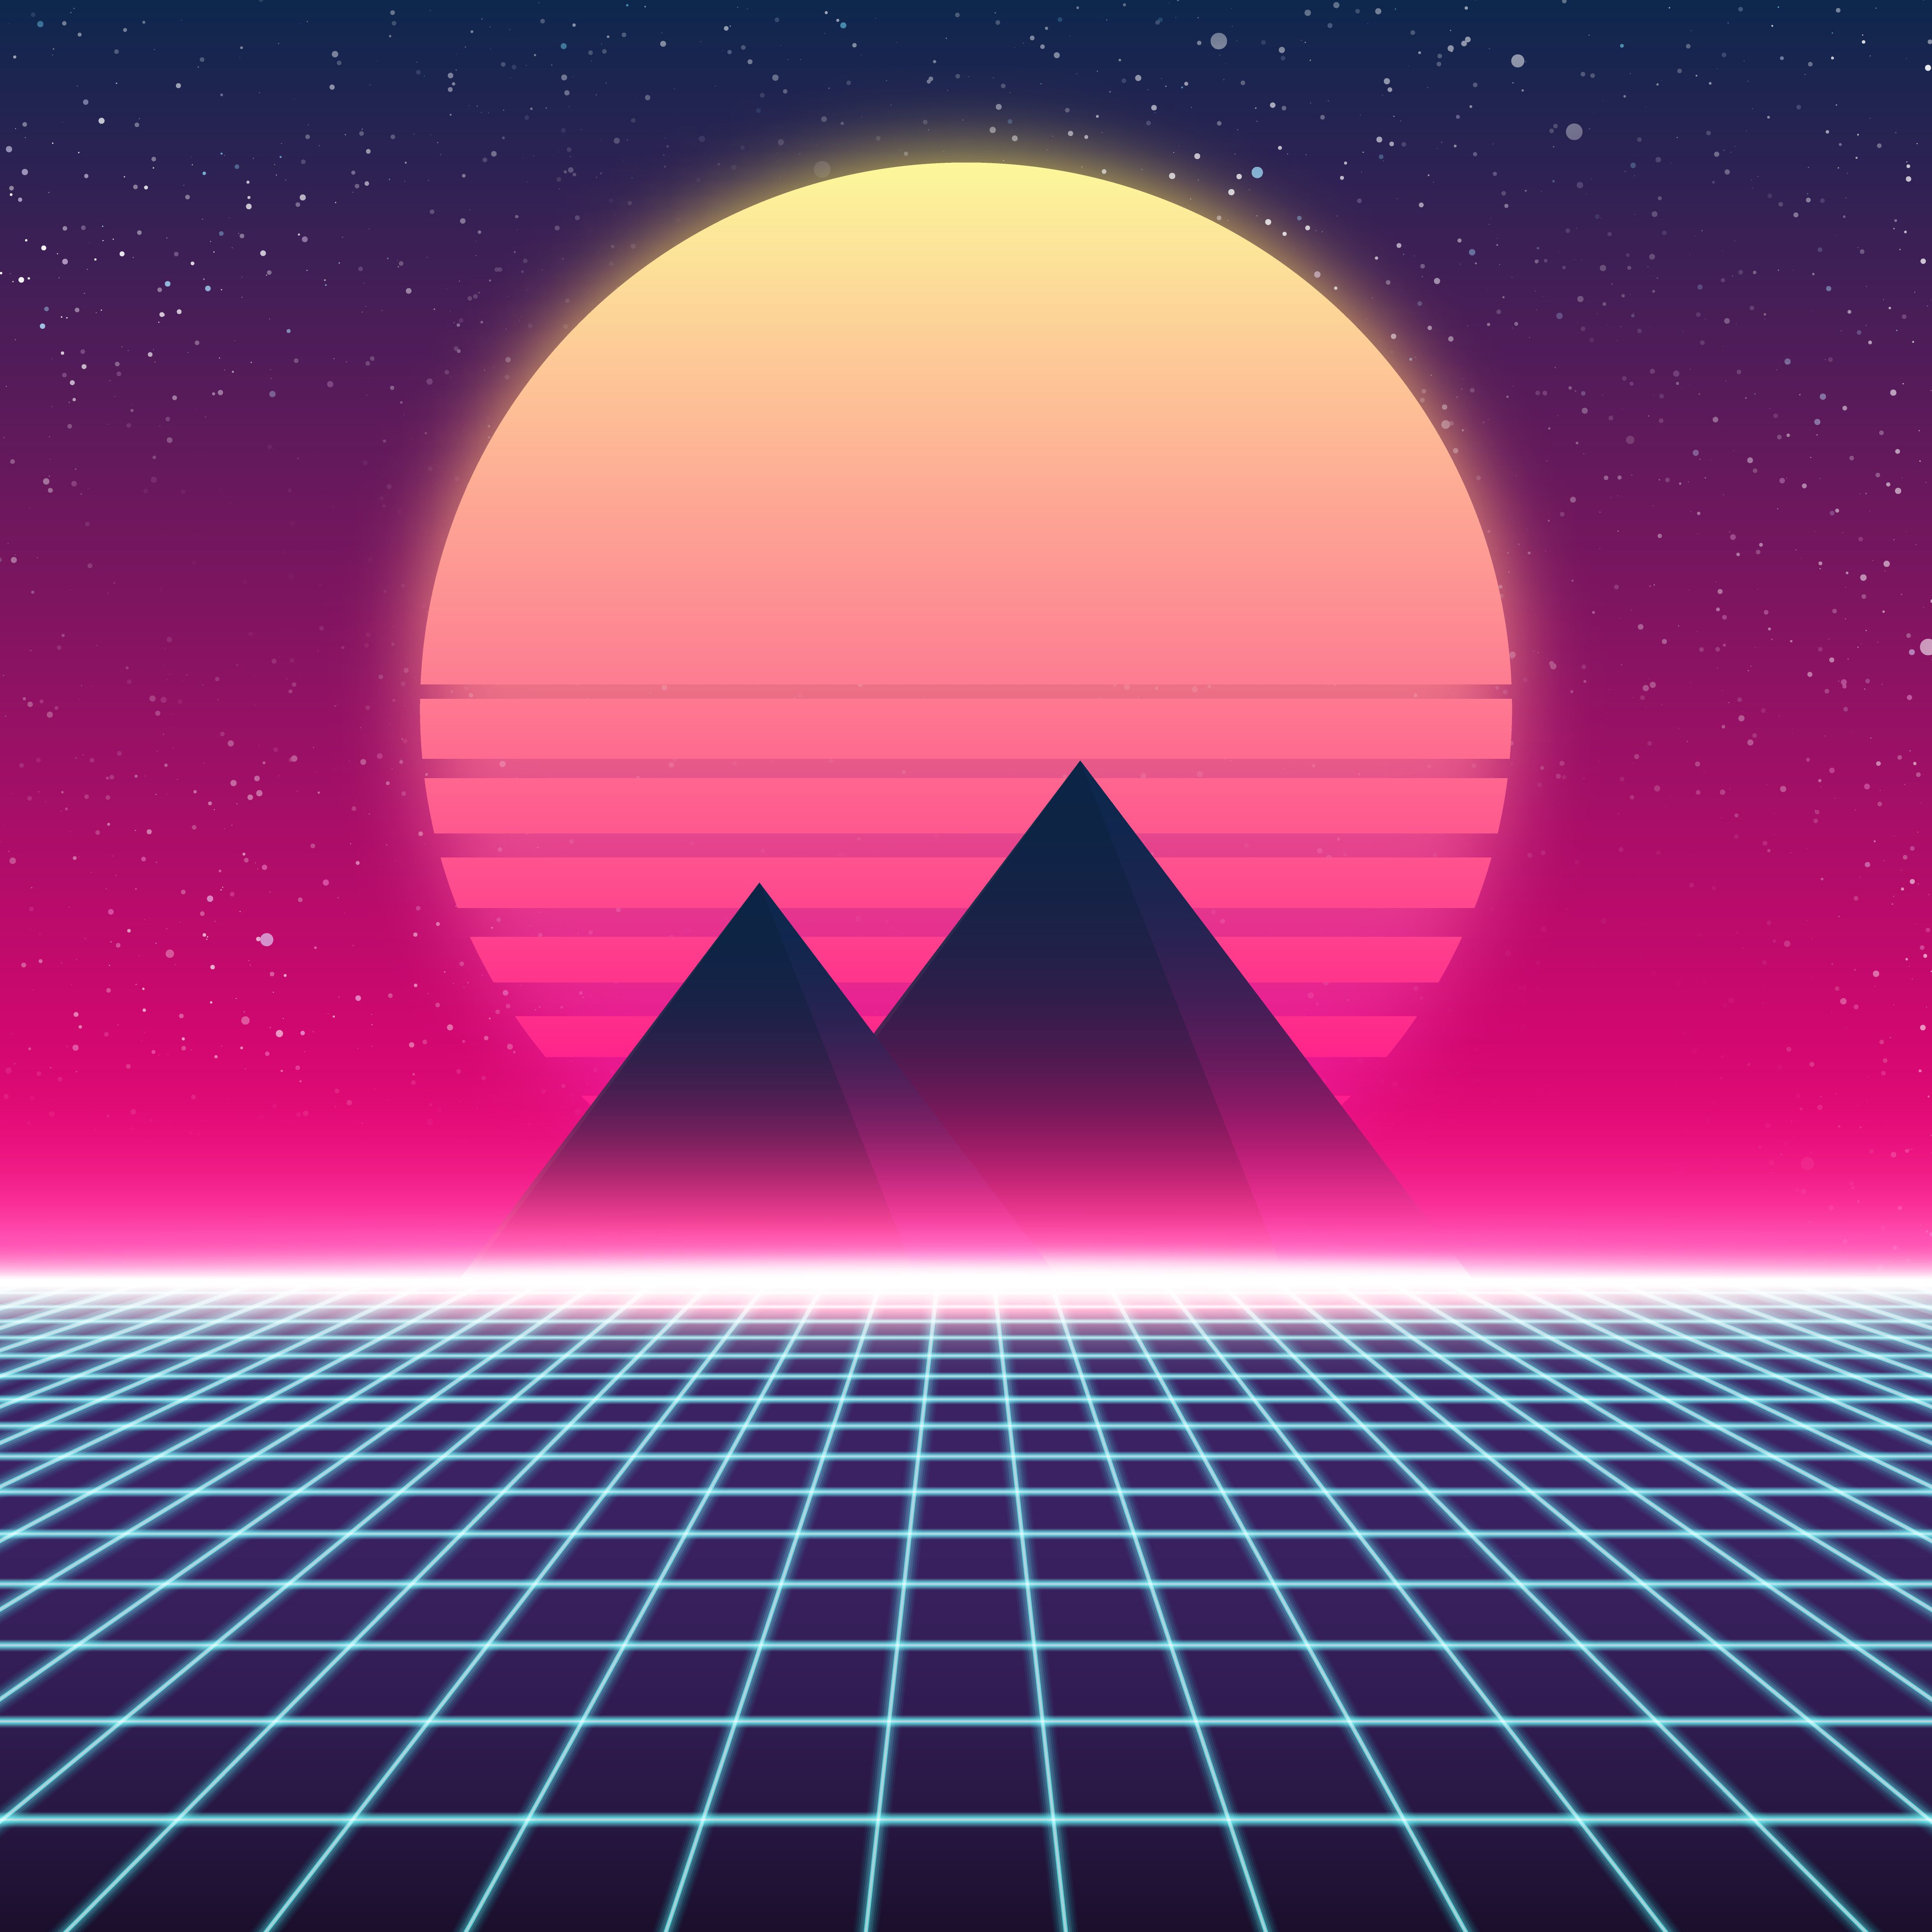 Synthwave retro design, Pyramids and sun, illustration. Synthwave